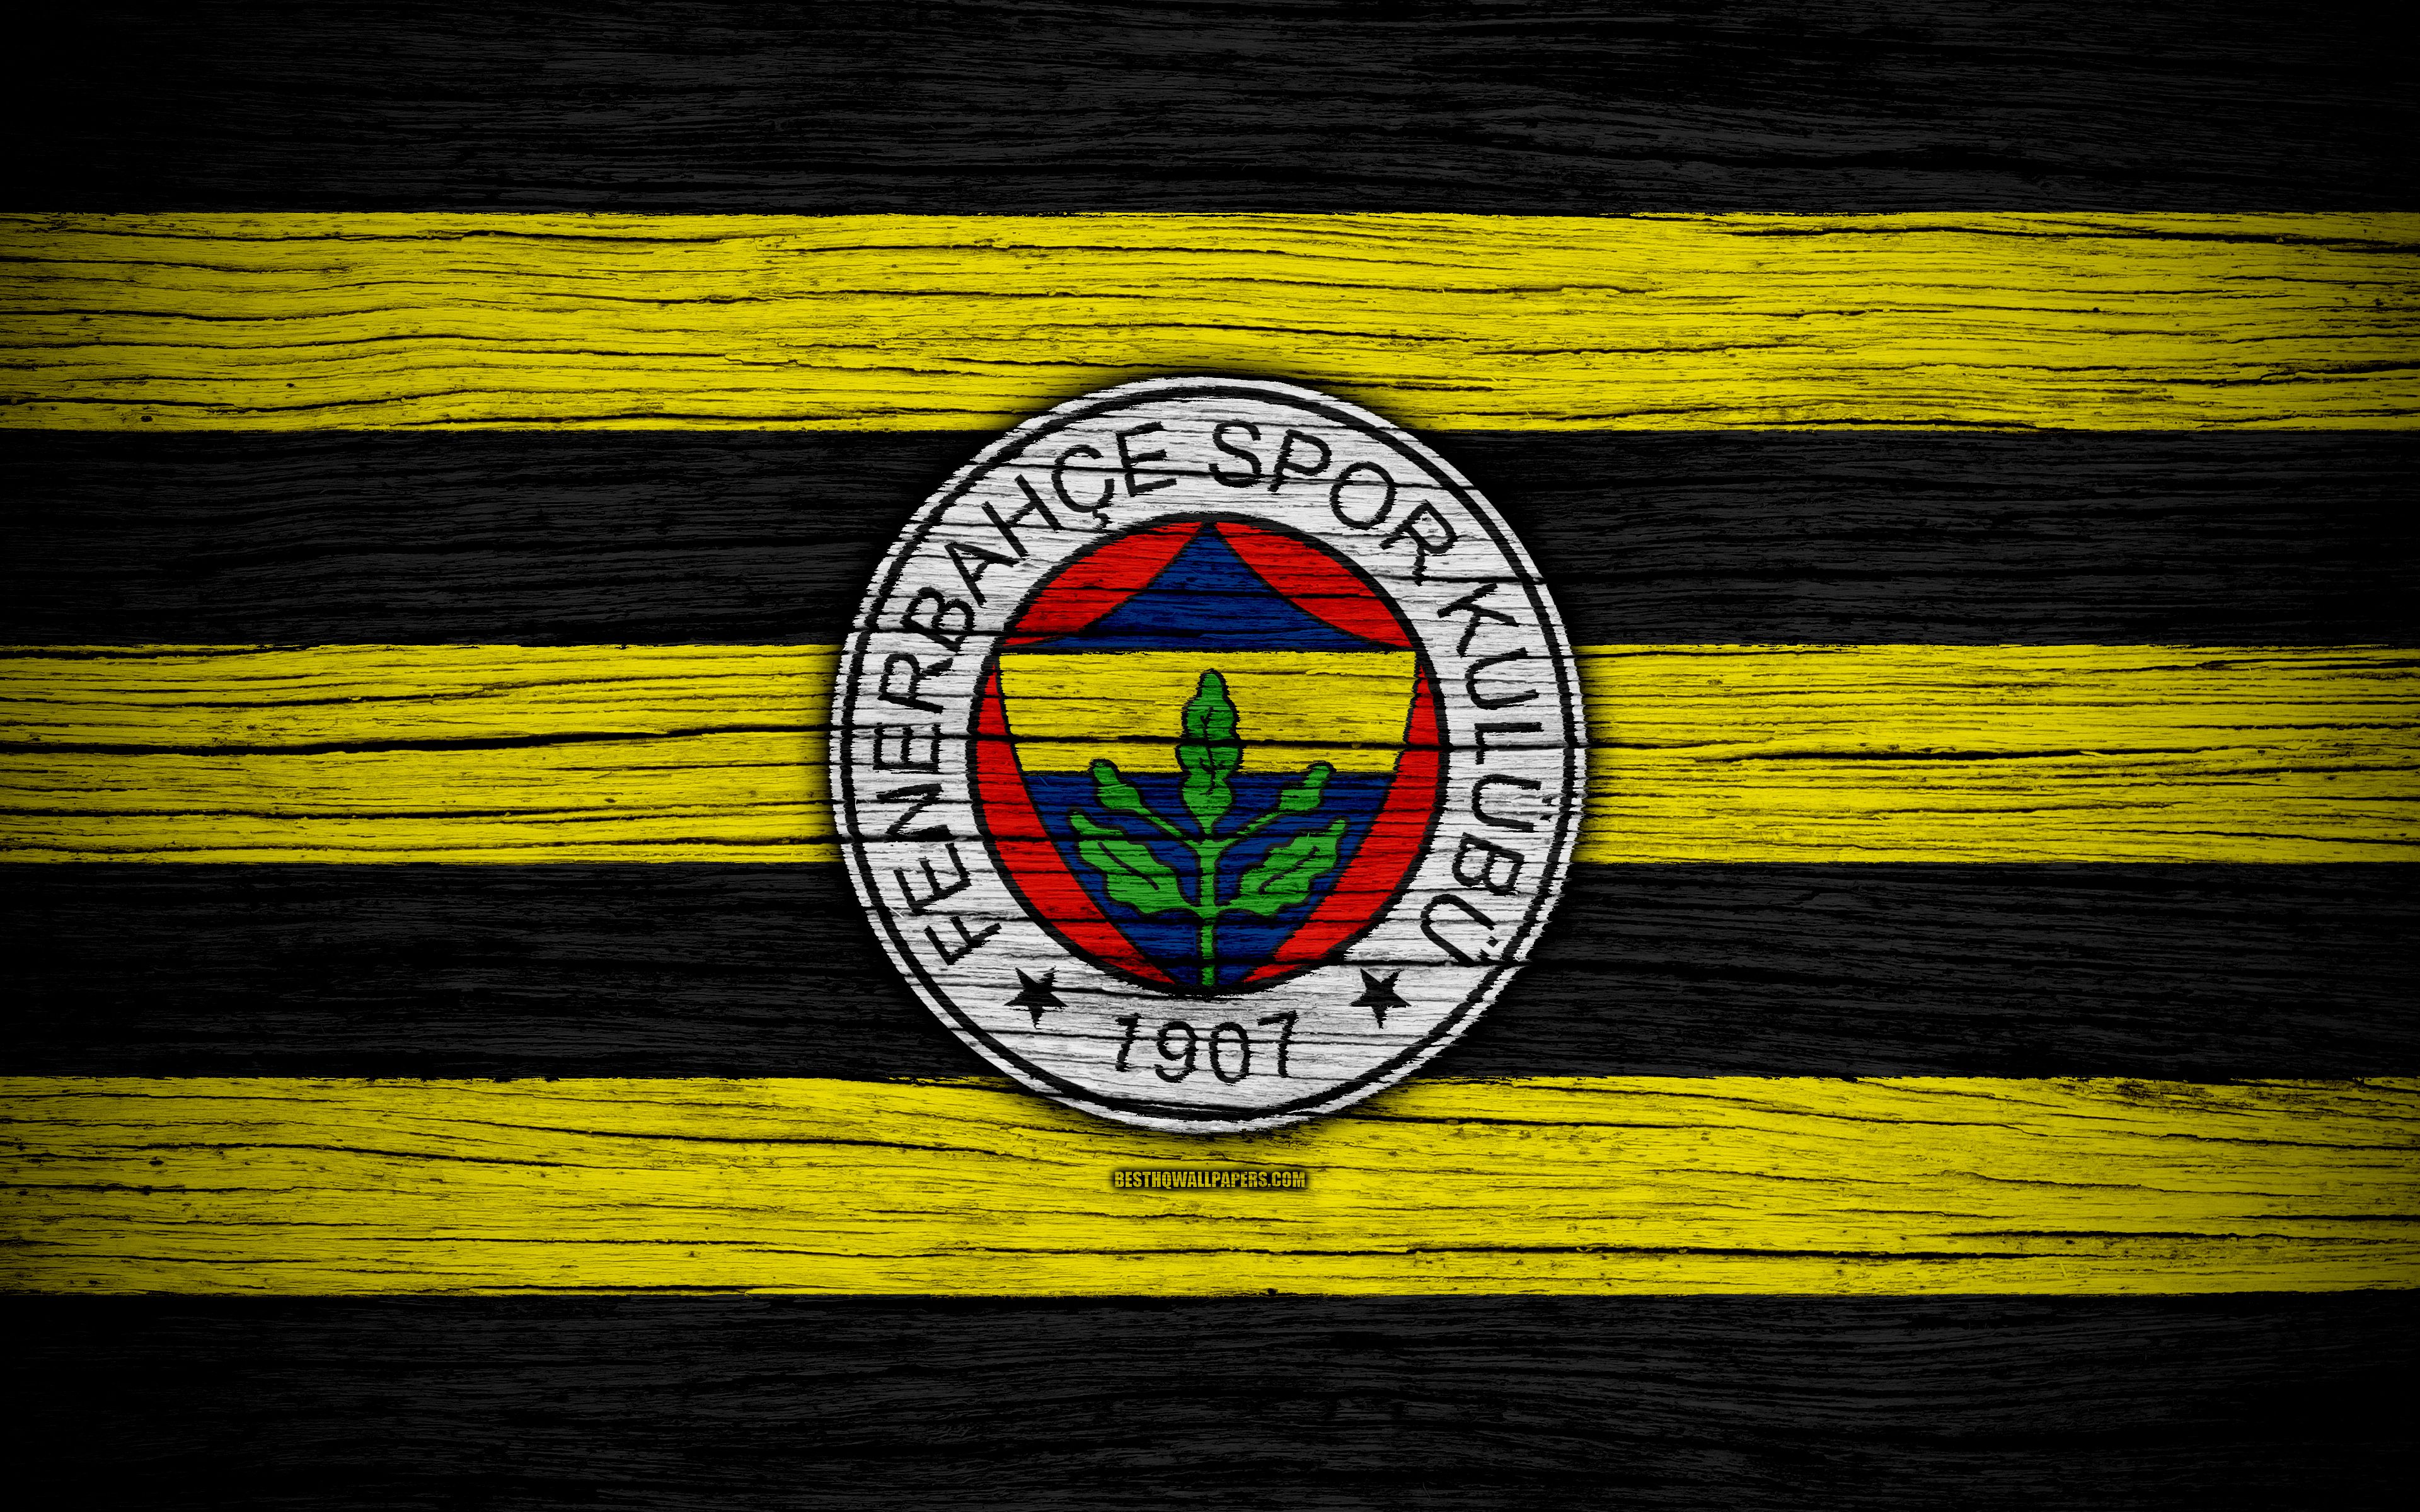 Download wallpaper Fenerbahce, 4k, Turkey, wooden texture, Super Lig, soccer, football club, FC Fenerbahce, art, football, FenerbahceFC for desktop with resolution 3840x2400. High Quality HD picture wallpaper